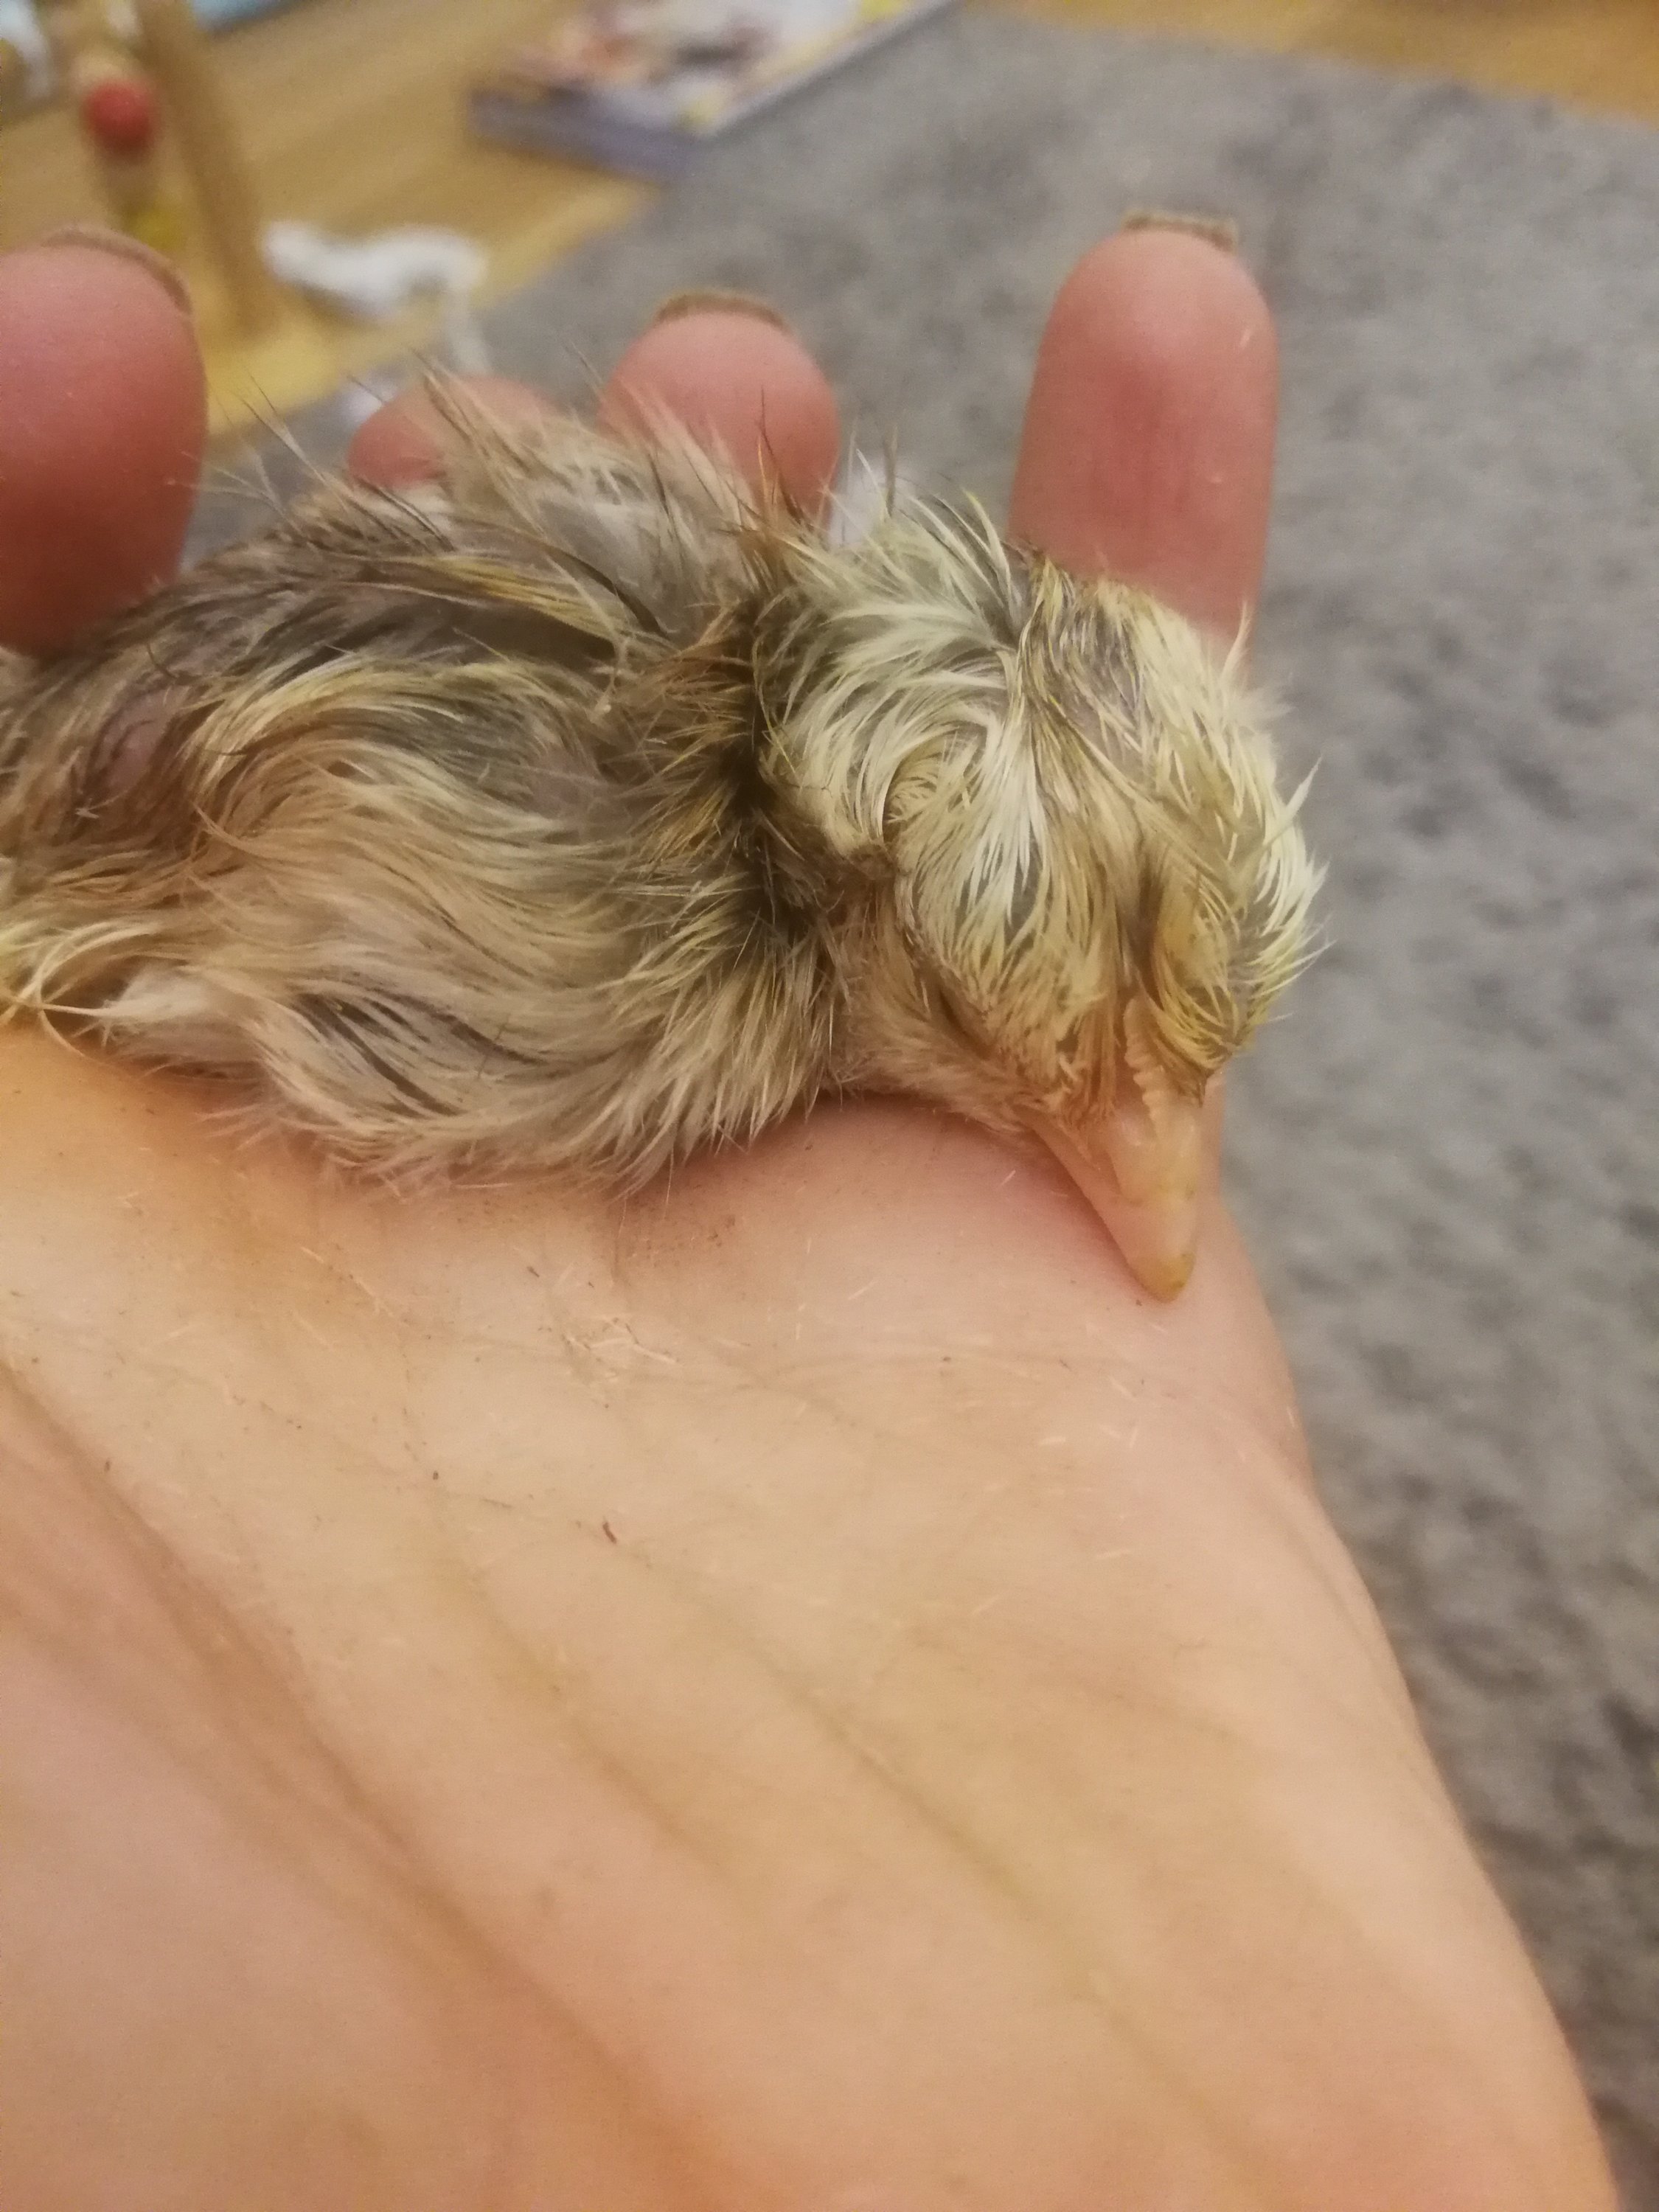 Little newly hatched chick in my hand